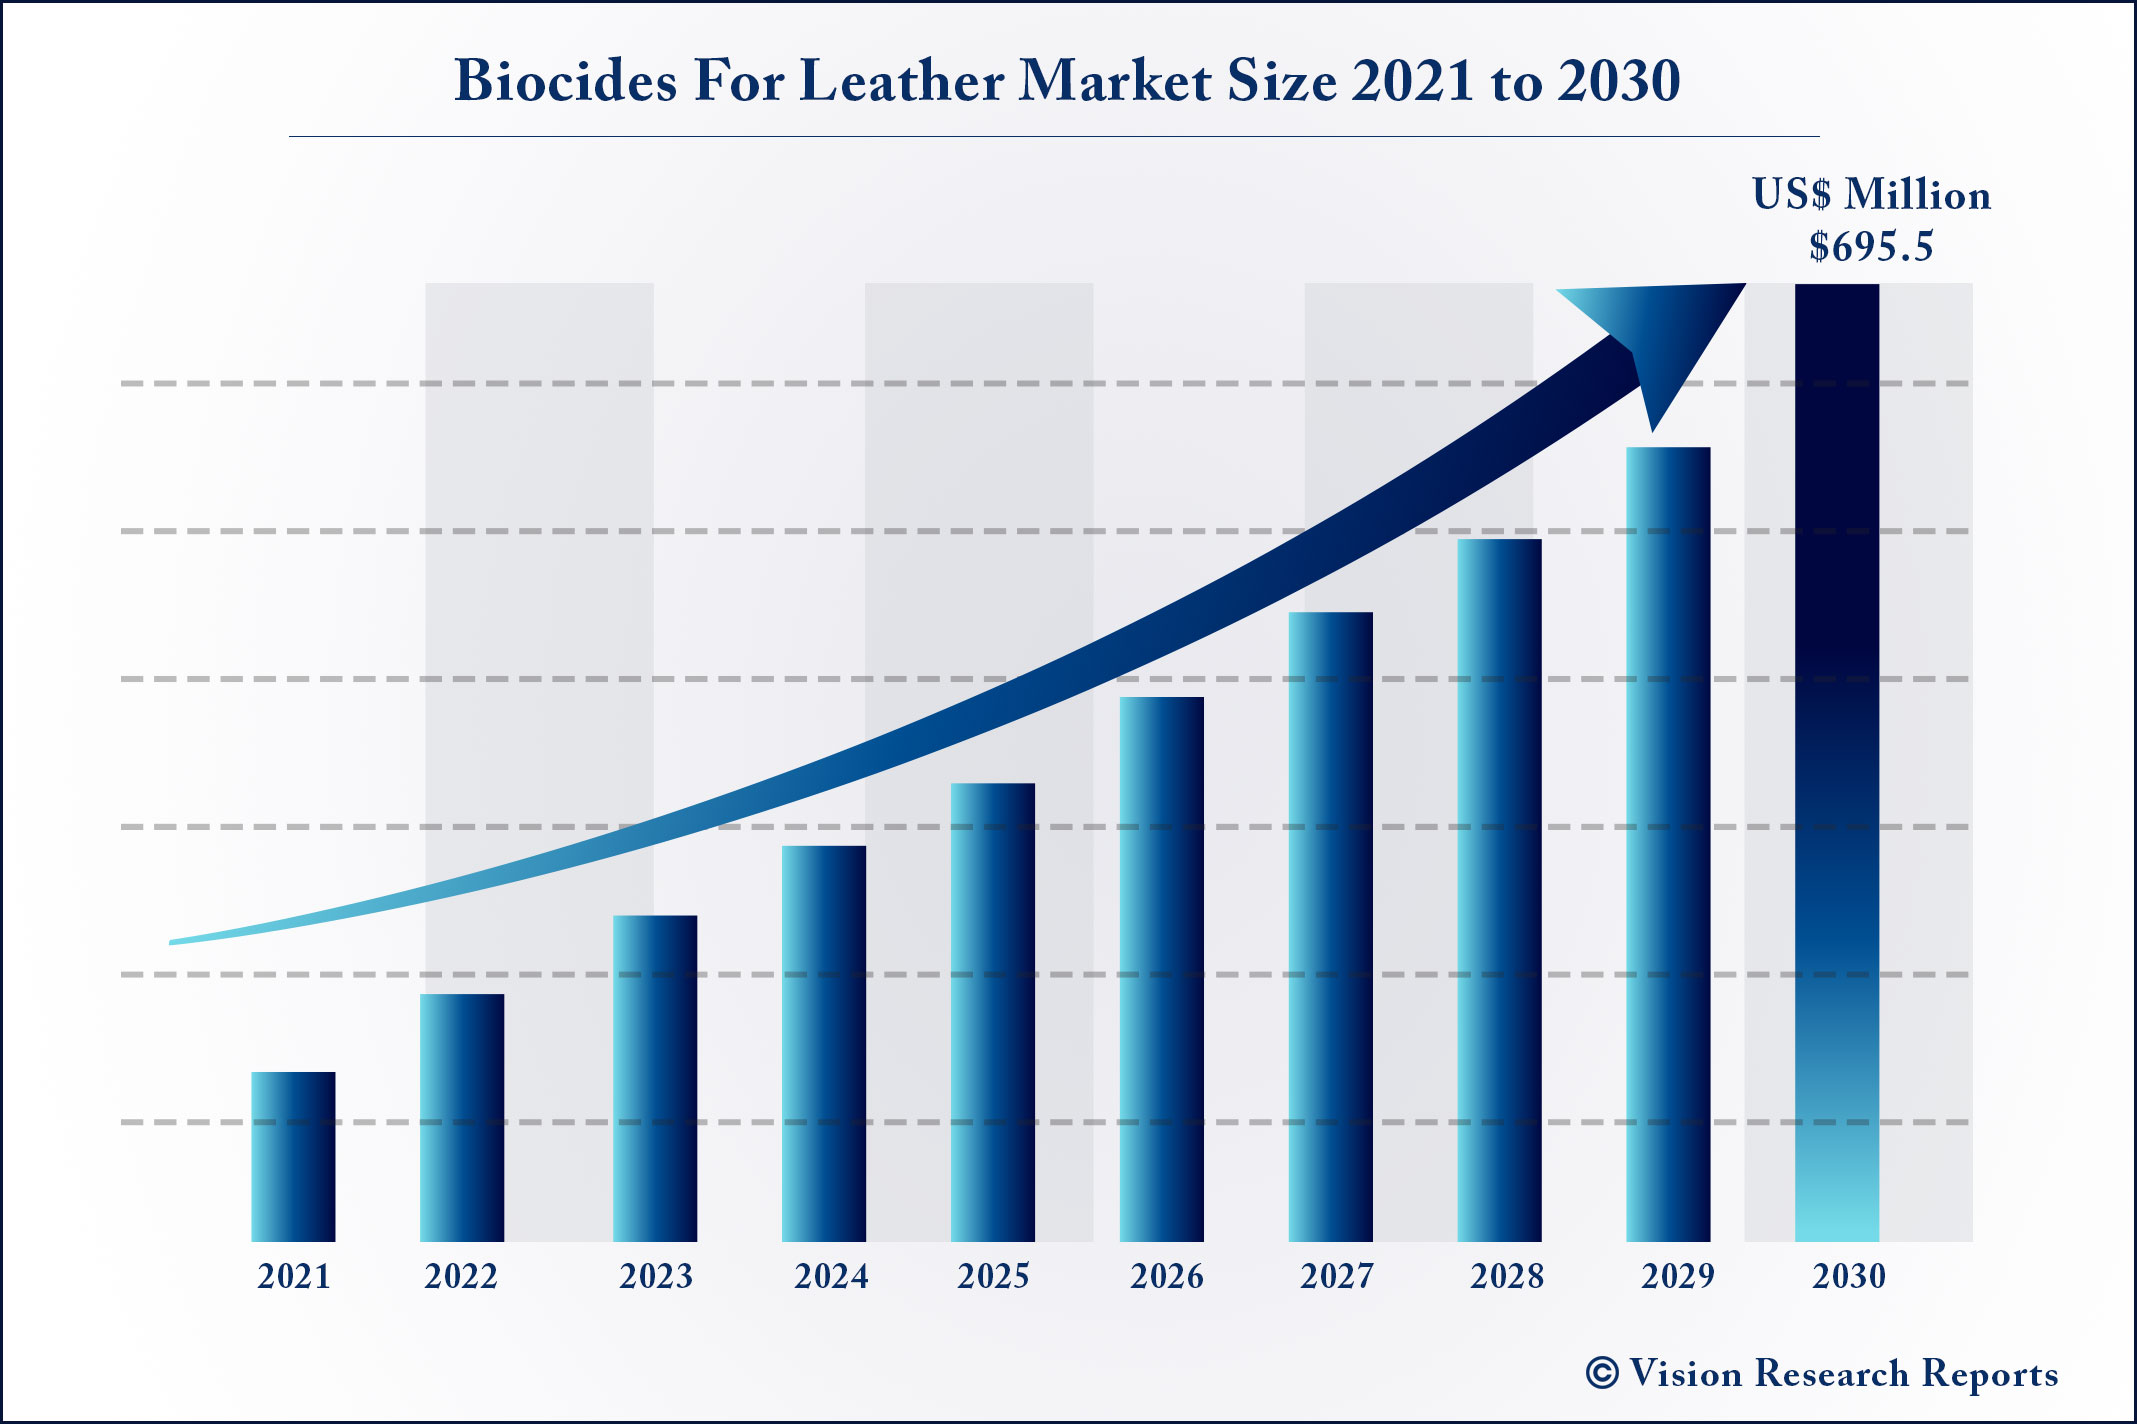 Biocides For Leather Market Size 2021 to 2030